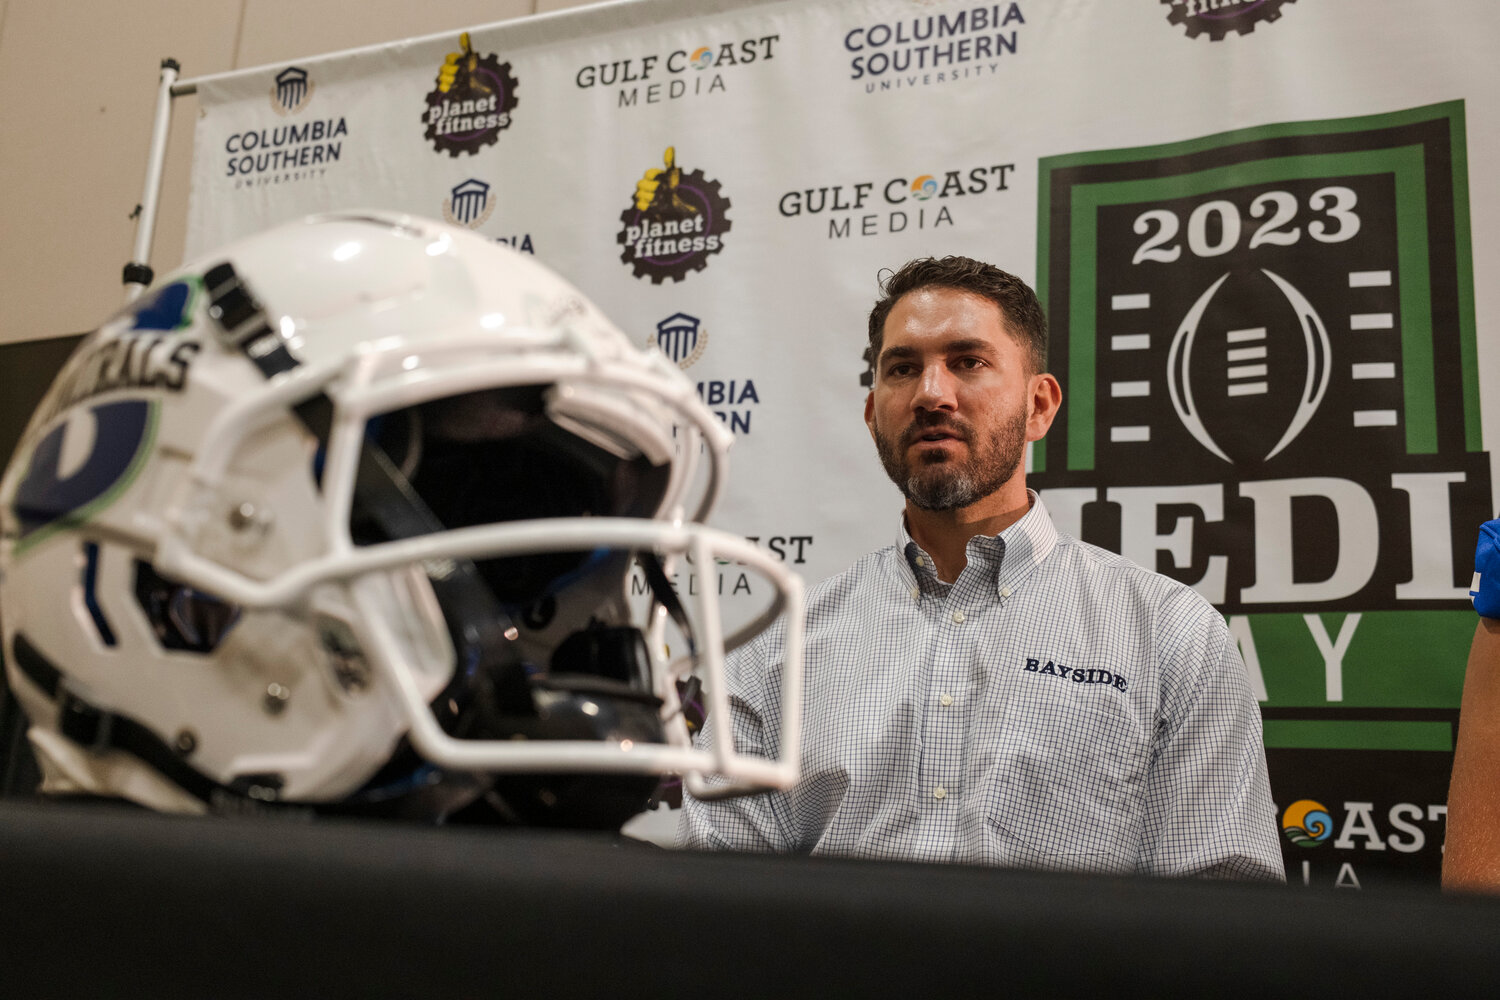 The third head football coach of the Bayside Academy Admirals, Barrett Trotter, joined local teams in previewing their seasons at the second-annual Gulf Coast Media Day at the Orange Beach Event Center on July 27. Heading into his first year as a head coach, Trotter will remain on the offensive side of the ball and call plays for the Admirals.